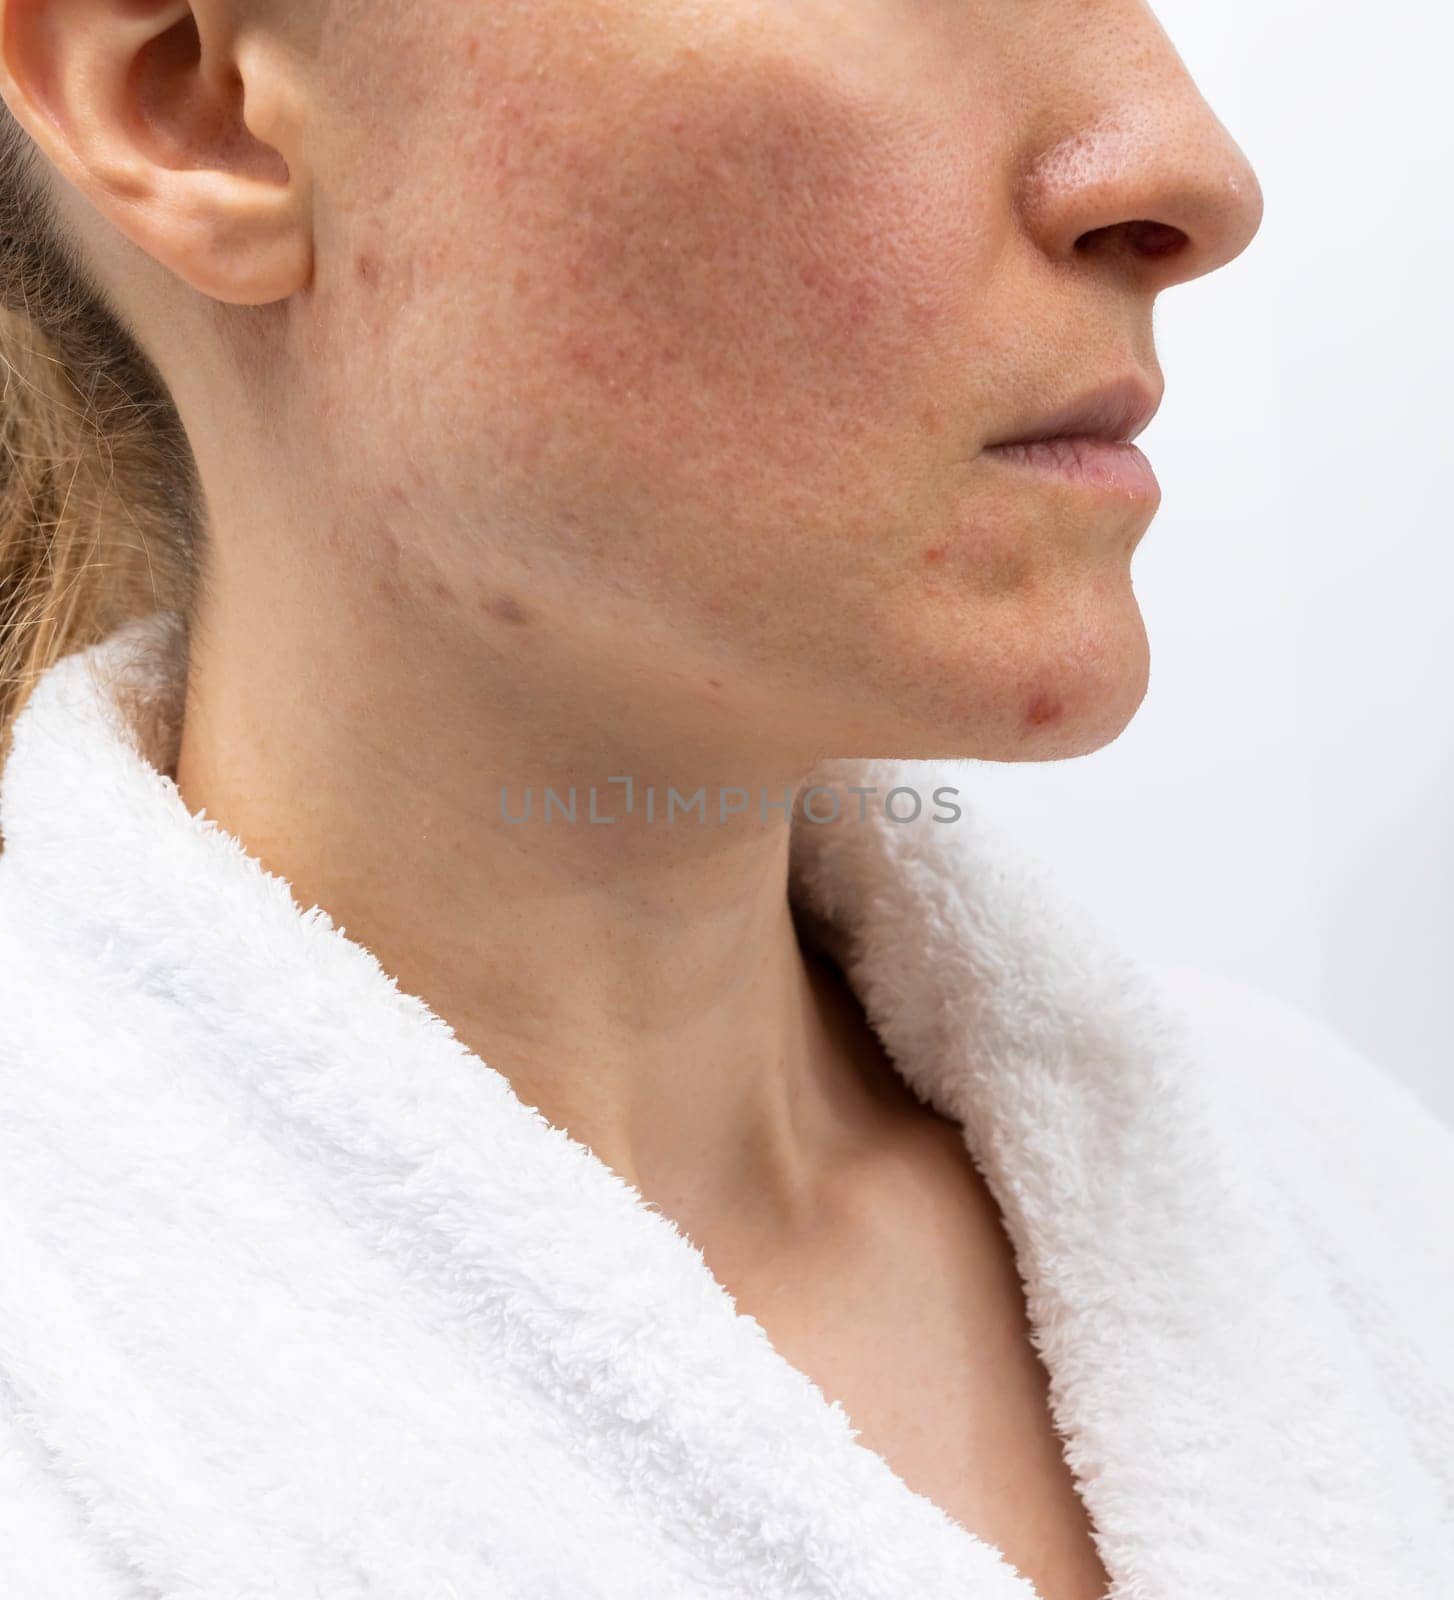 Closeup Face of Woman in her 30s with Acne Problem, Couperosis, Scarring, Blackheads. Vertical Plane, Adult Skin Problem. Cosmetics and Healthcare, Beauty Concept. Rosacea. High quality photo